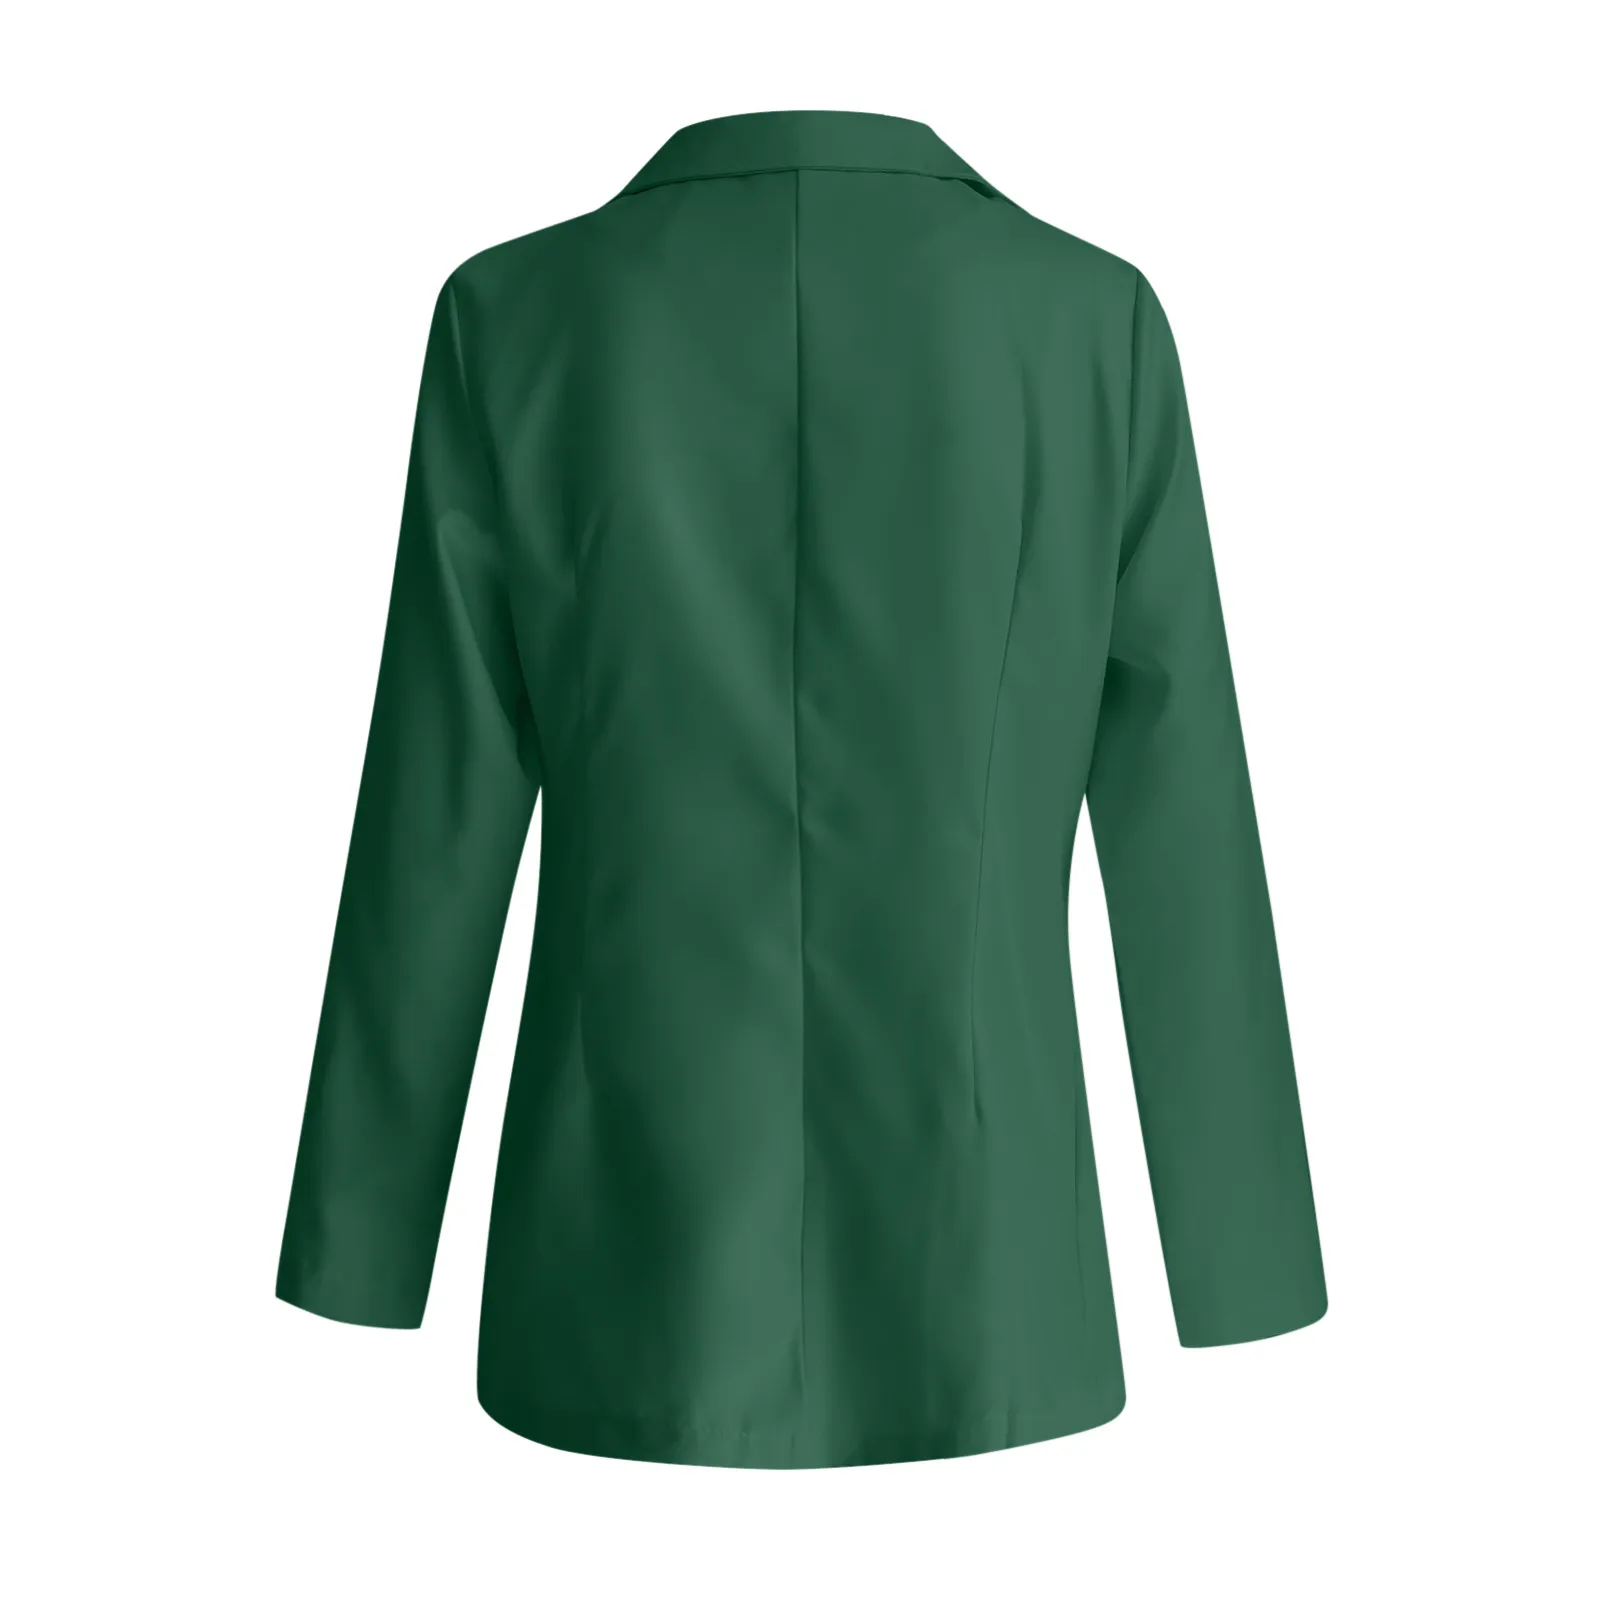 South Butt Jacket Women's Casual Light Weight Thin Jacket Slim Coat Long Sleeve Blazer Office Pant Suits for Women Dressy images - 6